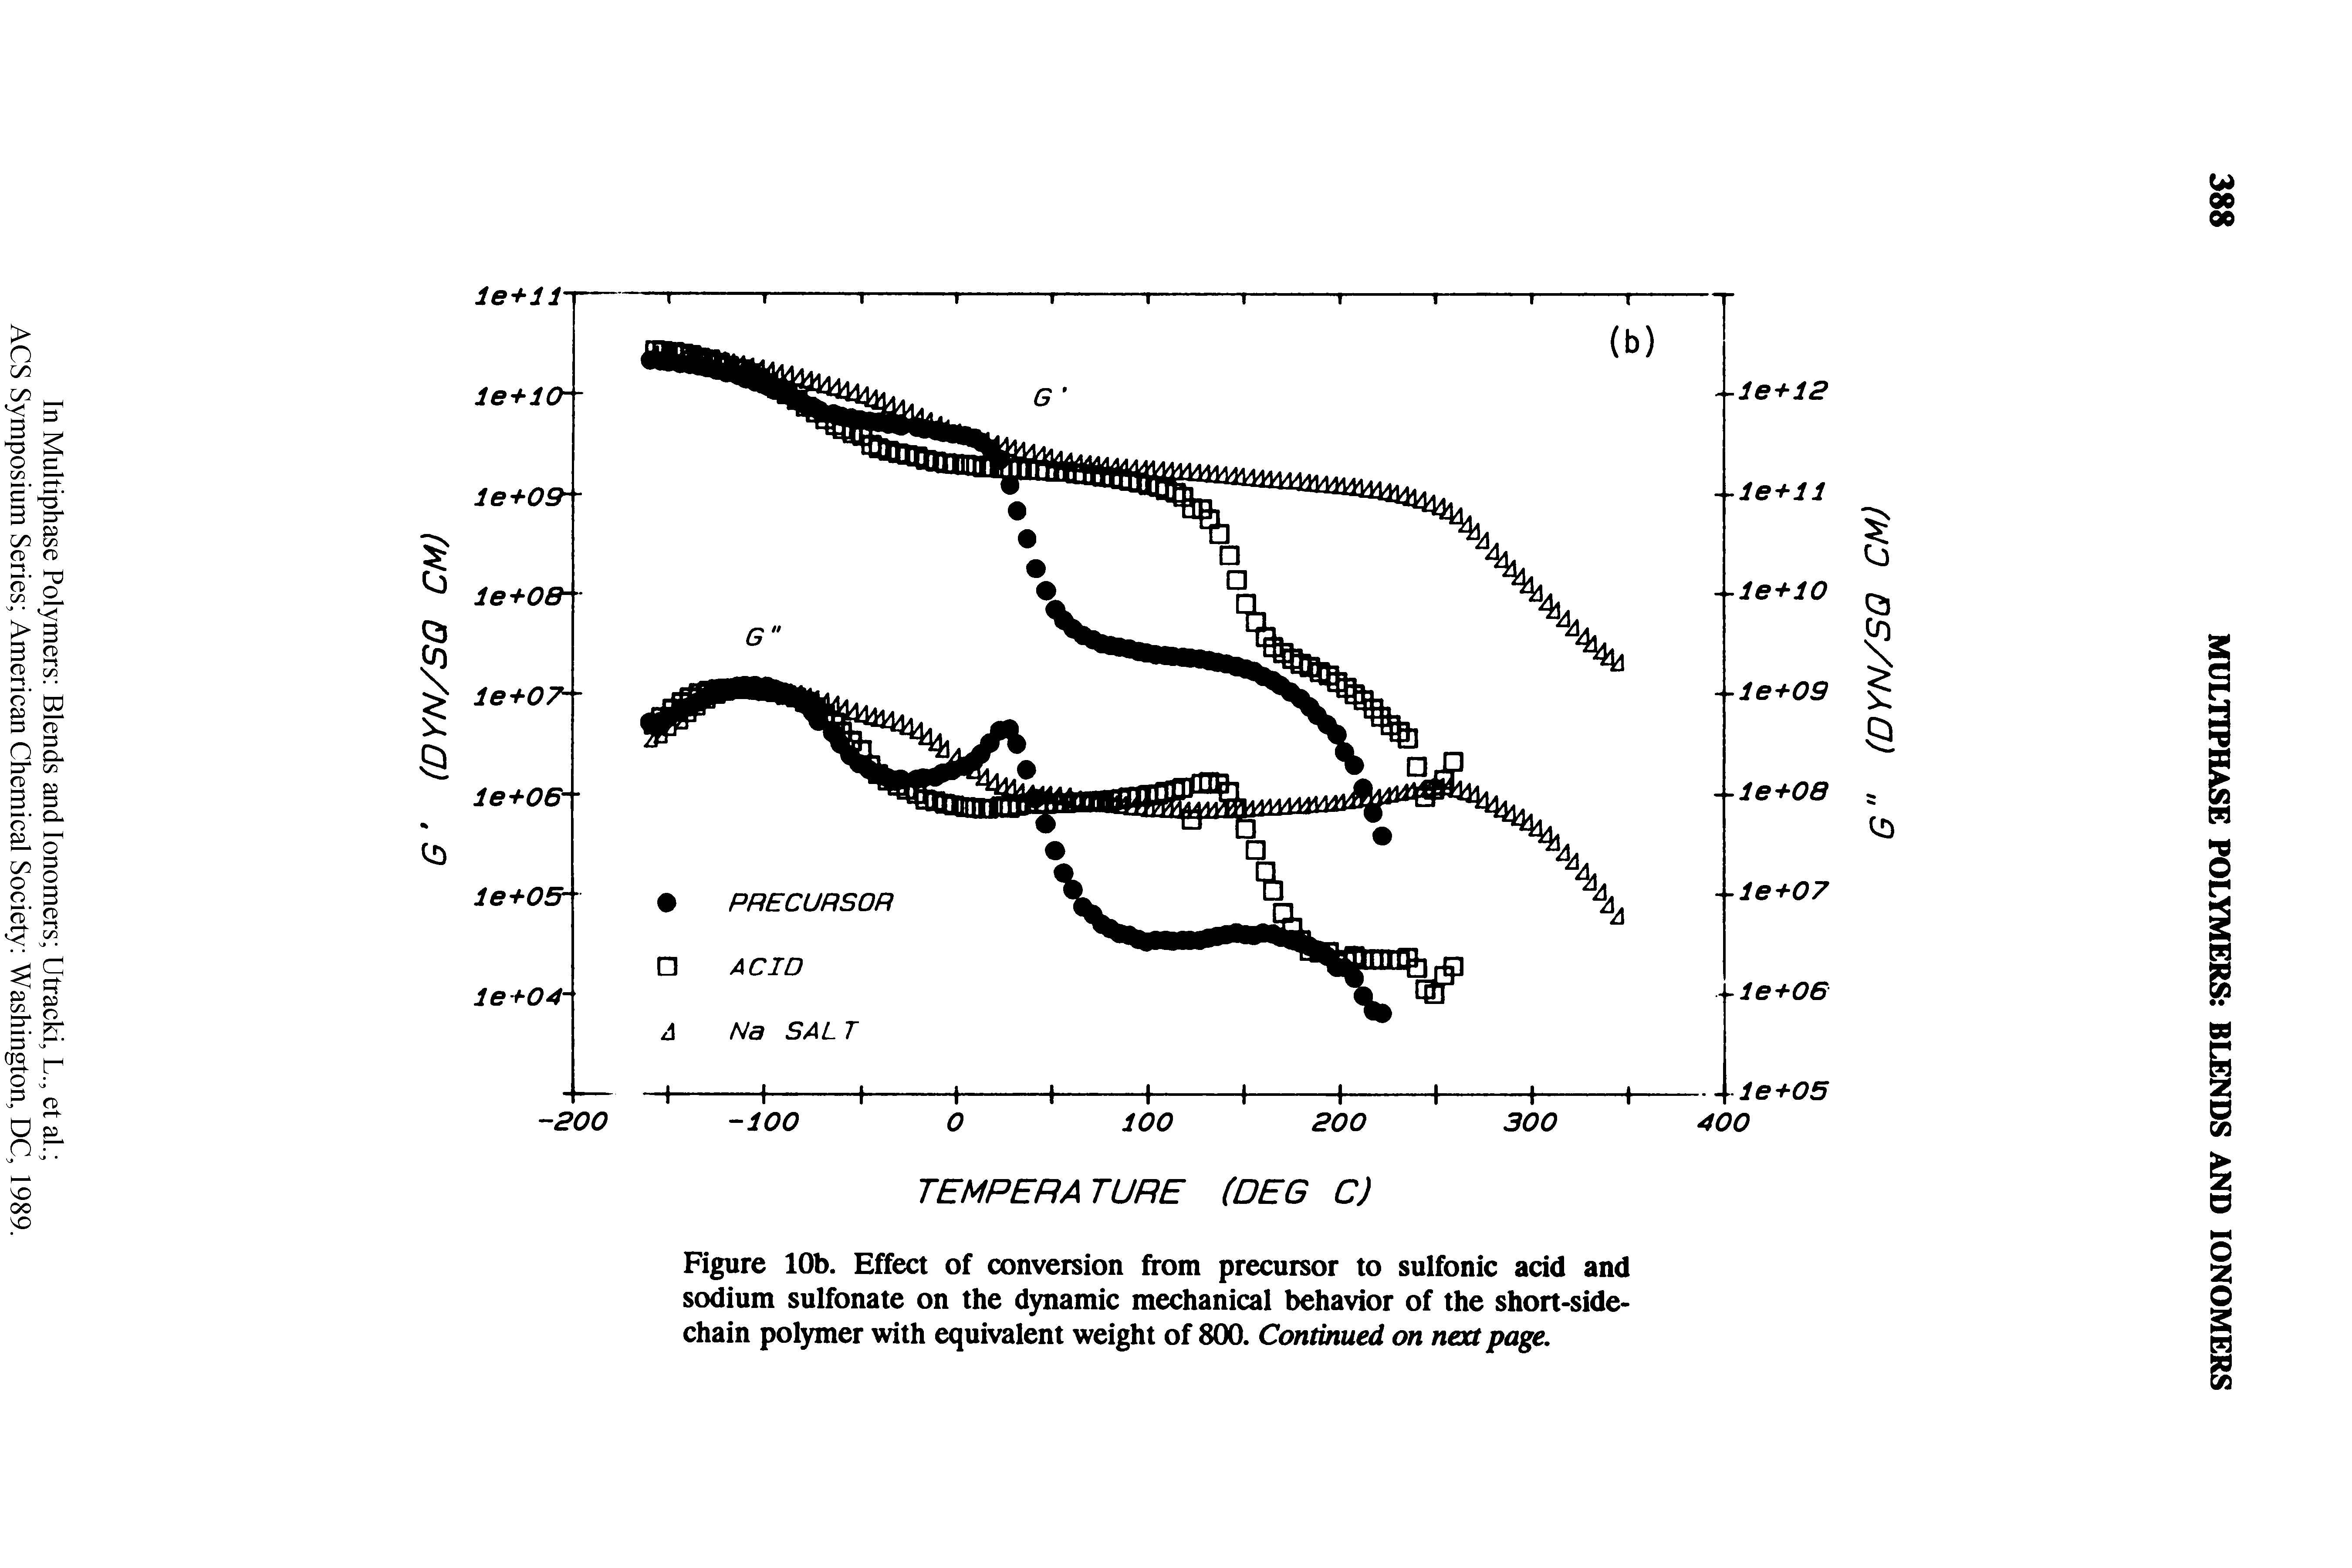 Figure 10b. Effect of conversion from precursor to sulfonic acid and sodium sulfonate on the dynamic mechanical behavior of the short-side chain polymer with equivalent weight of 800. Continued on next page.